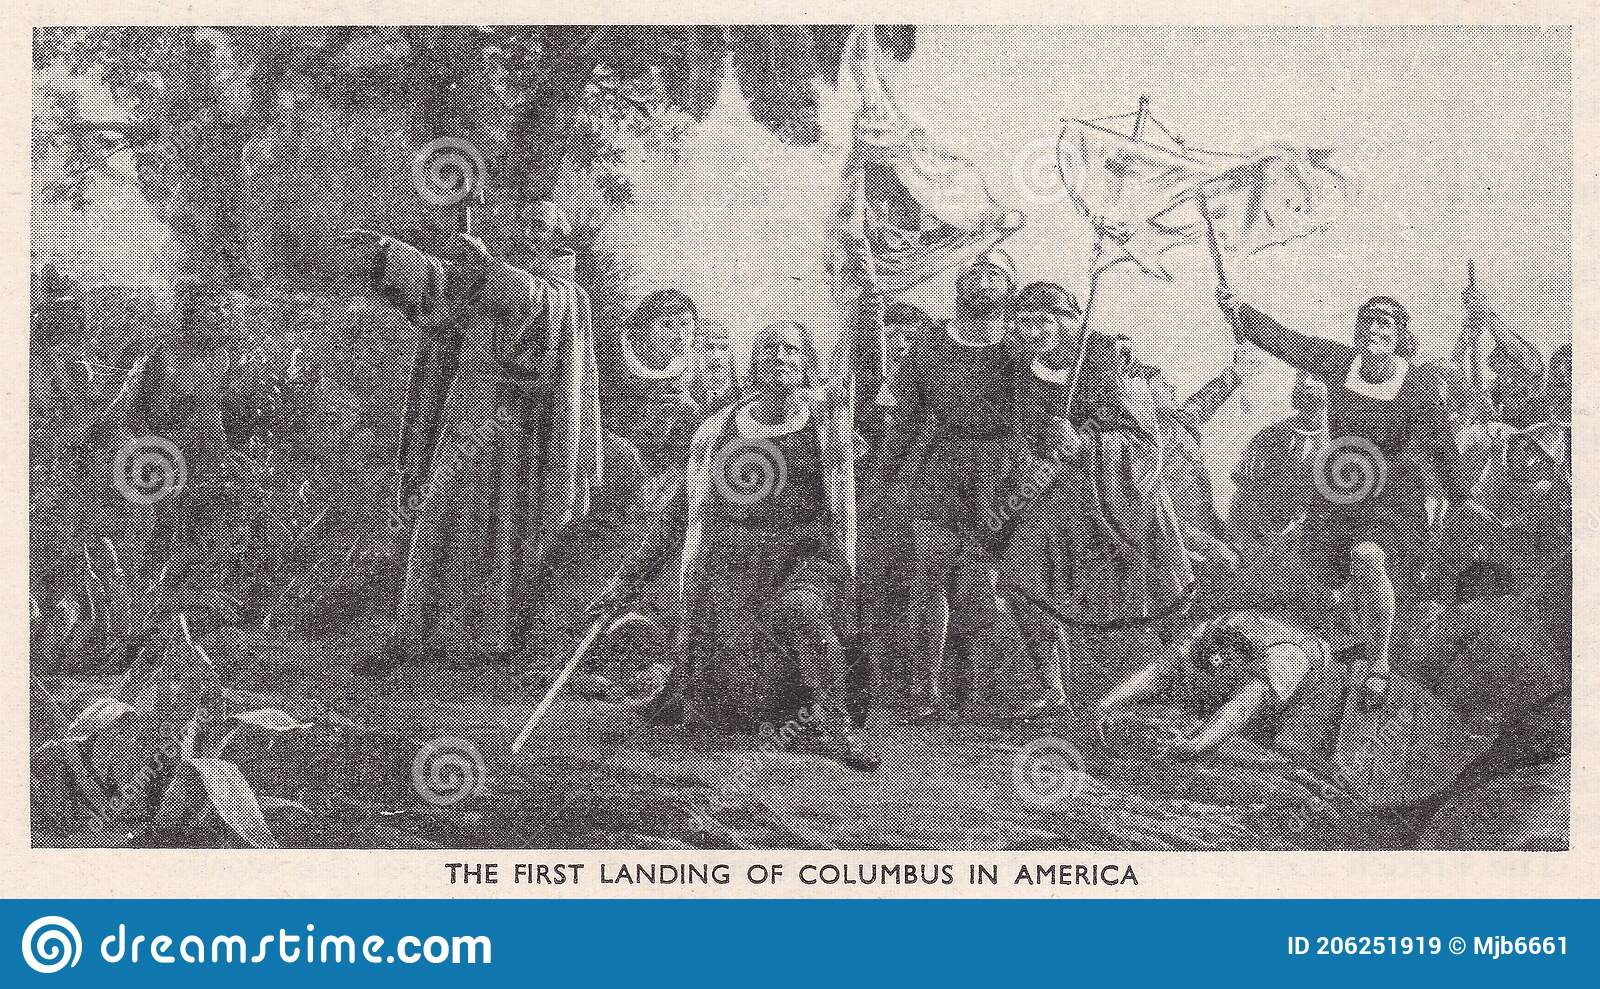 what was the first place in the americas that columbus landed